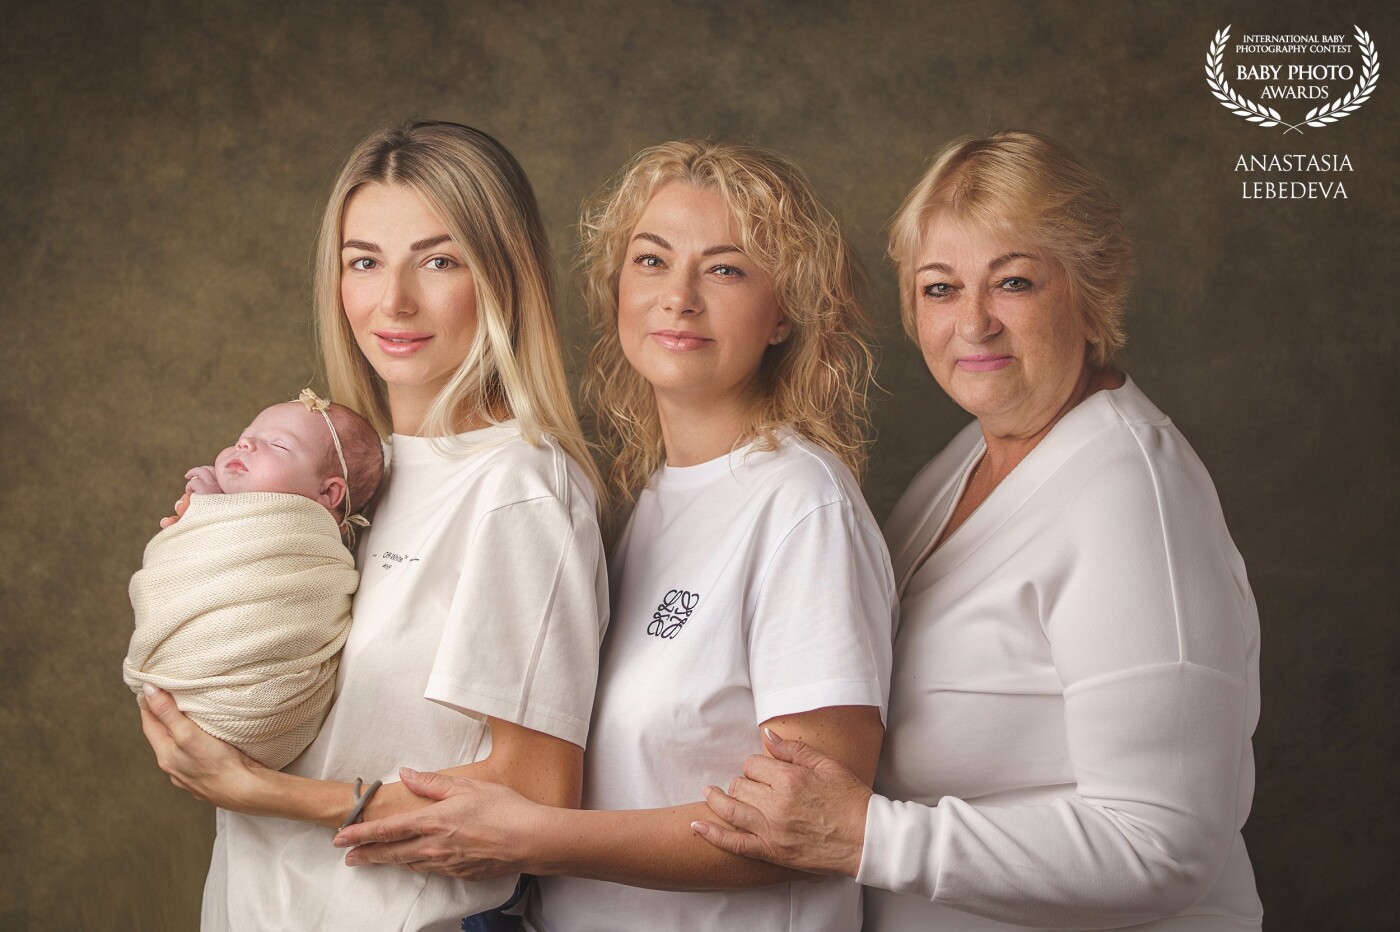 There are four generations in this photo ... Pro-grandmother, grandmother, mother and daughter ... Follow this example! They are beautiful, sweet, gentle and beloved! Great photo. I thank the whole family for such support.